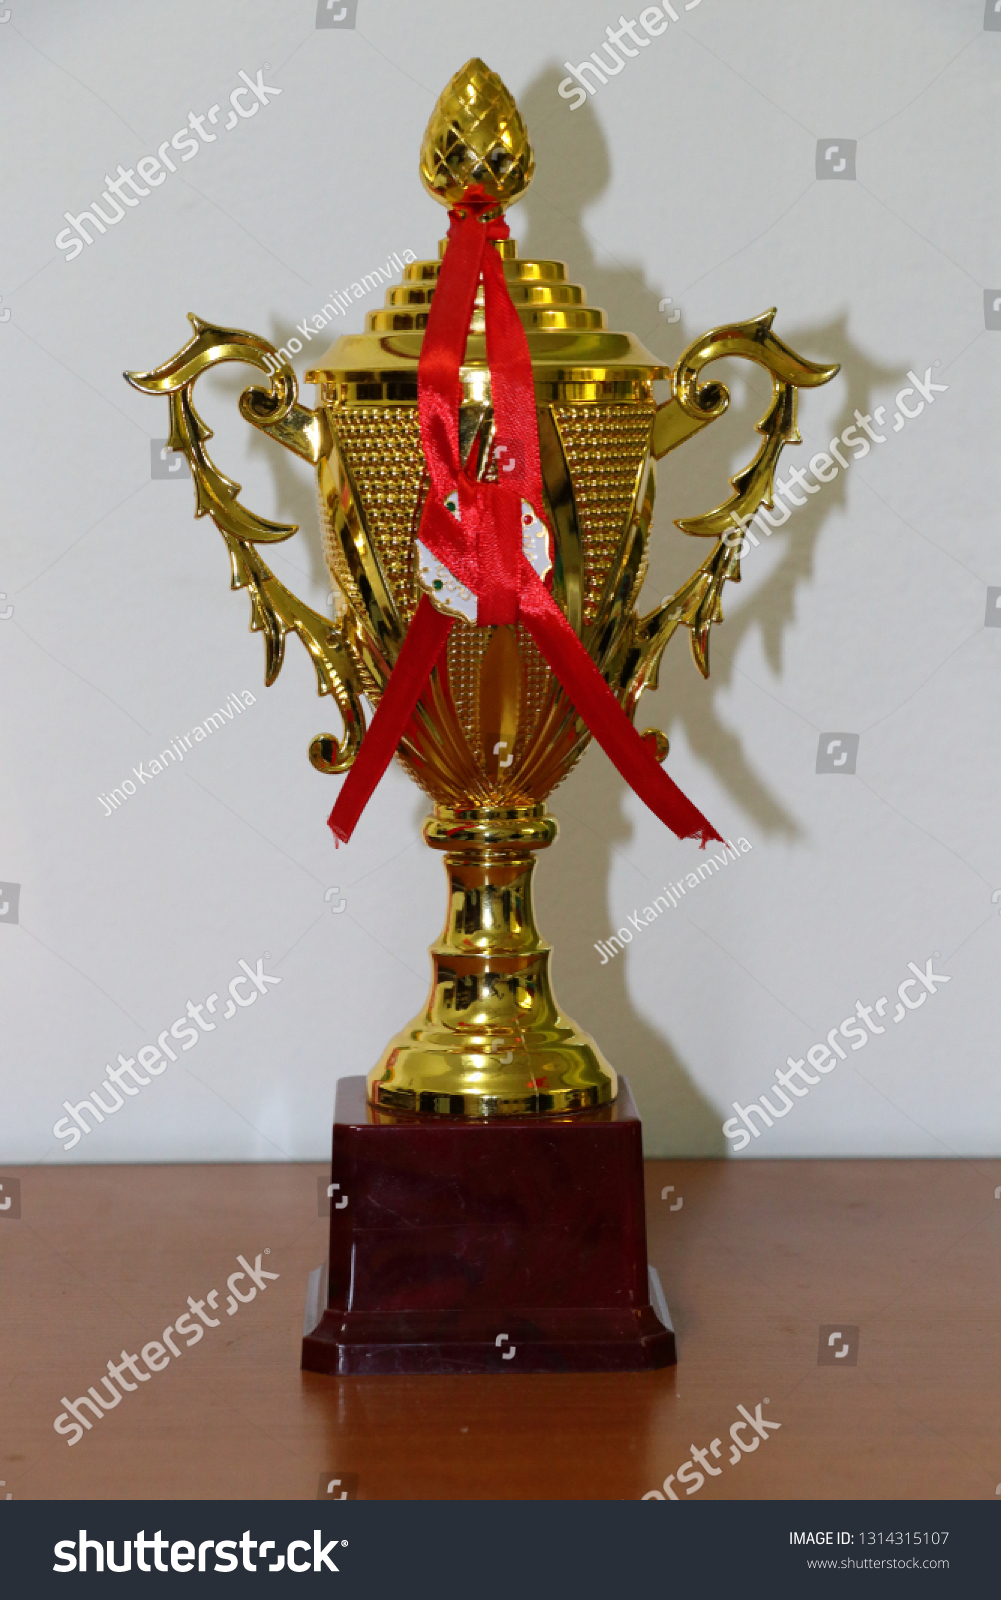 champion golden trophy on wood table with copy space, copy space ready for your design #1314315107